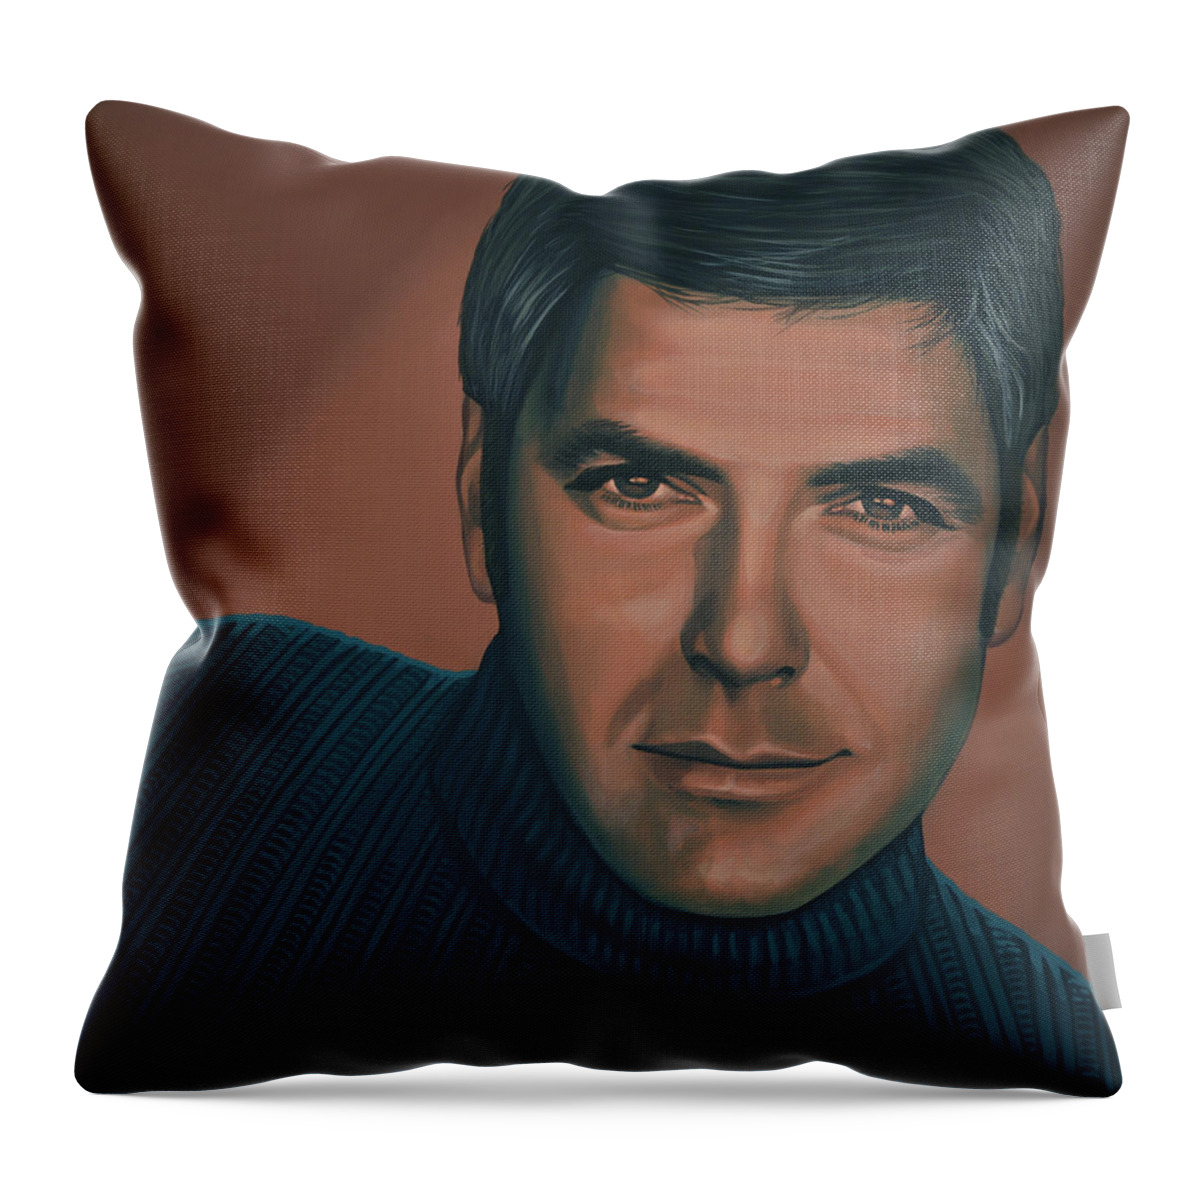 George Clooney Throw Pillow featuring the painting George Clooney Painting by Paul Meijering